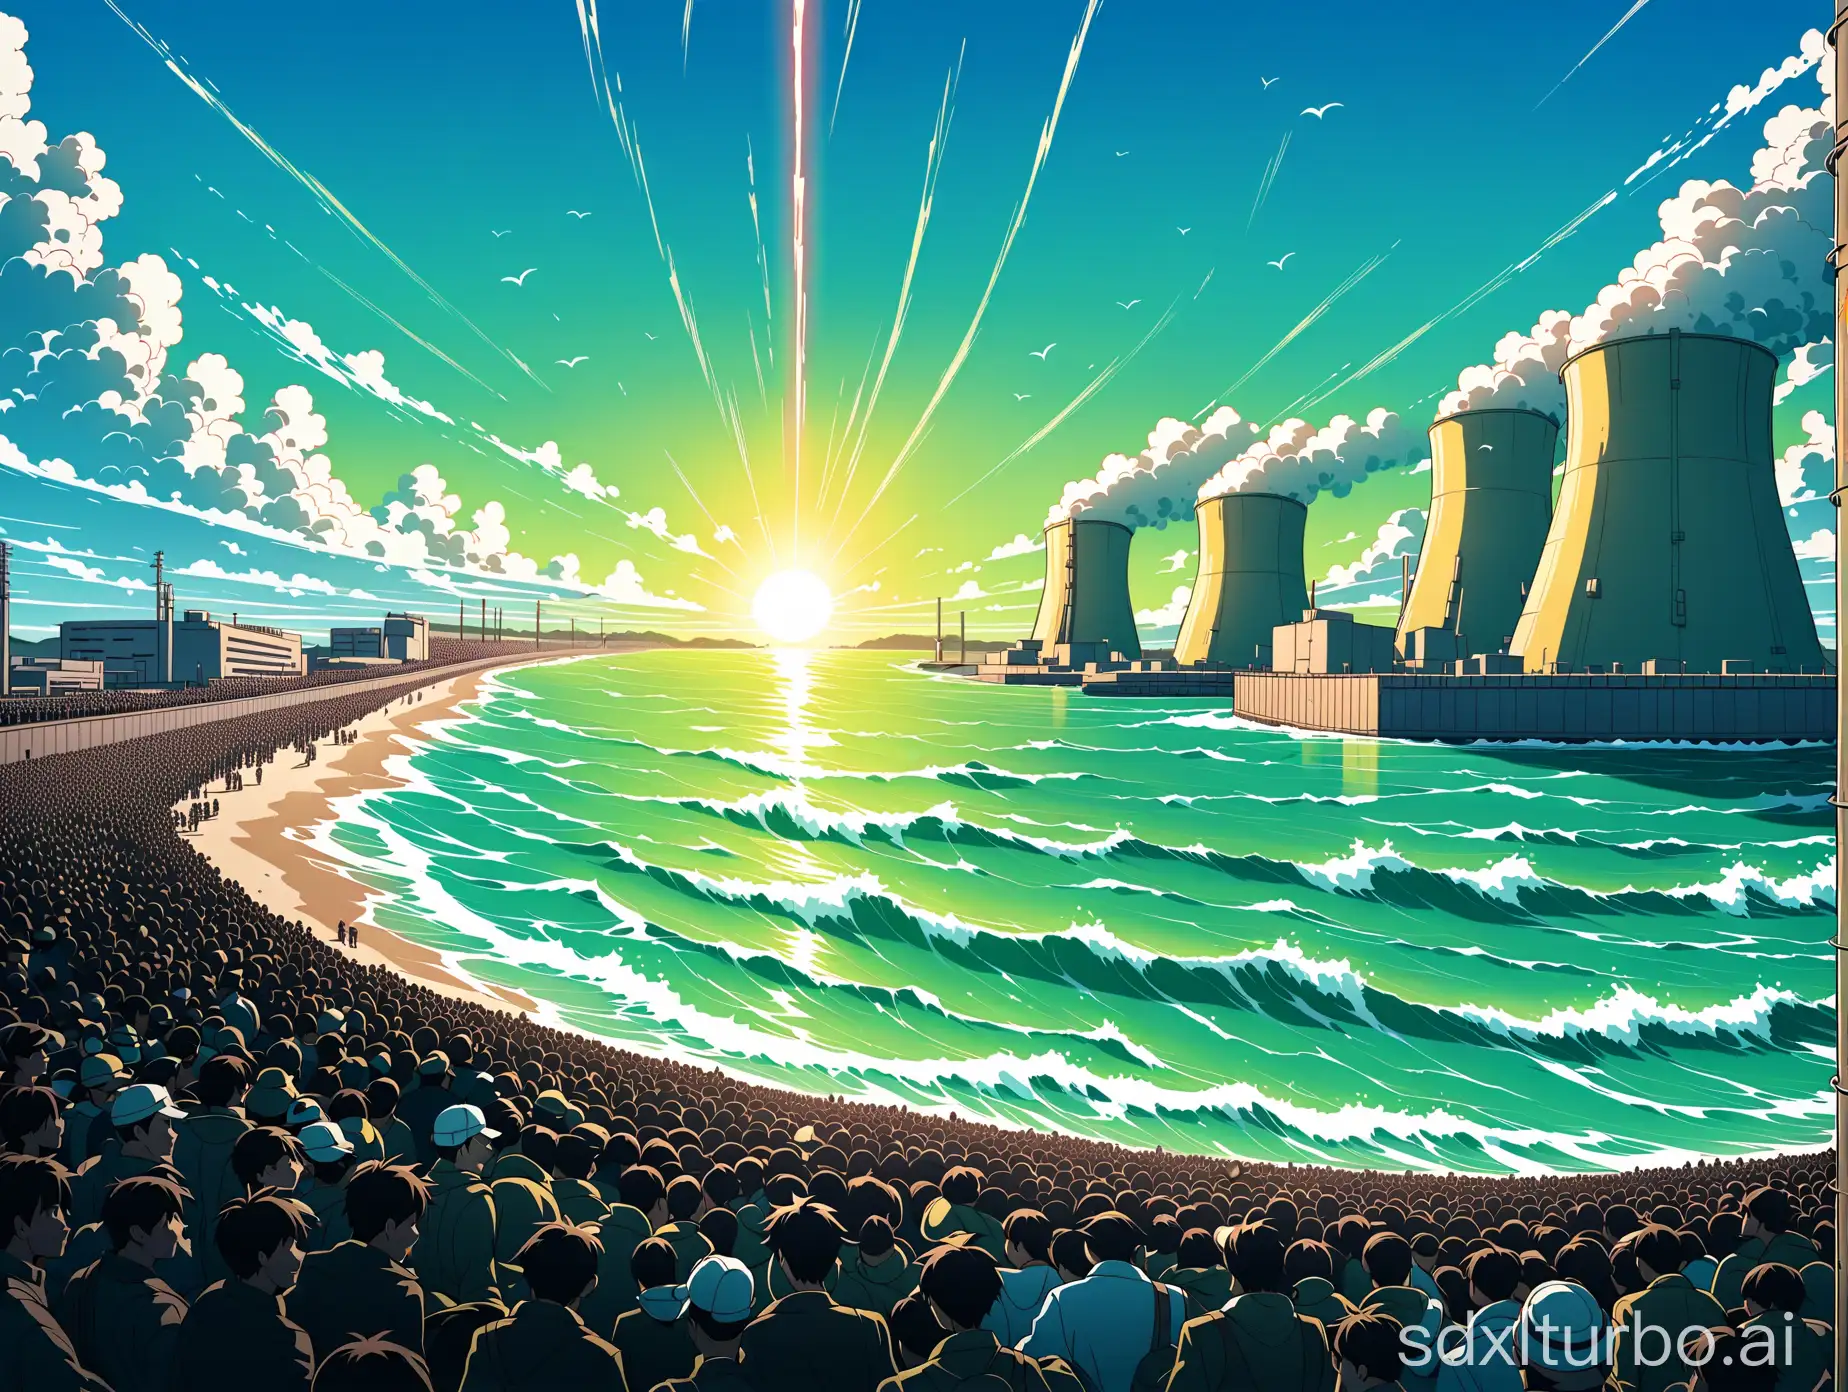 Anime-Style-Seaside-Nuclear-Power-Plant-Crowds-Scrambling-for-Nuclear-Waste-Water